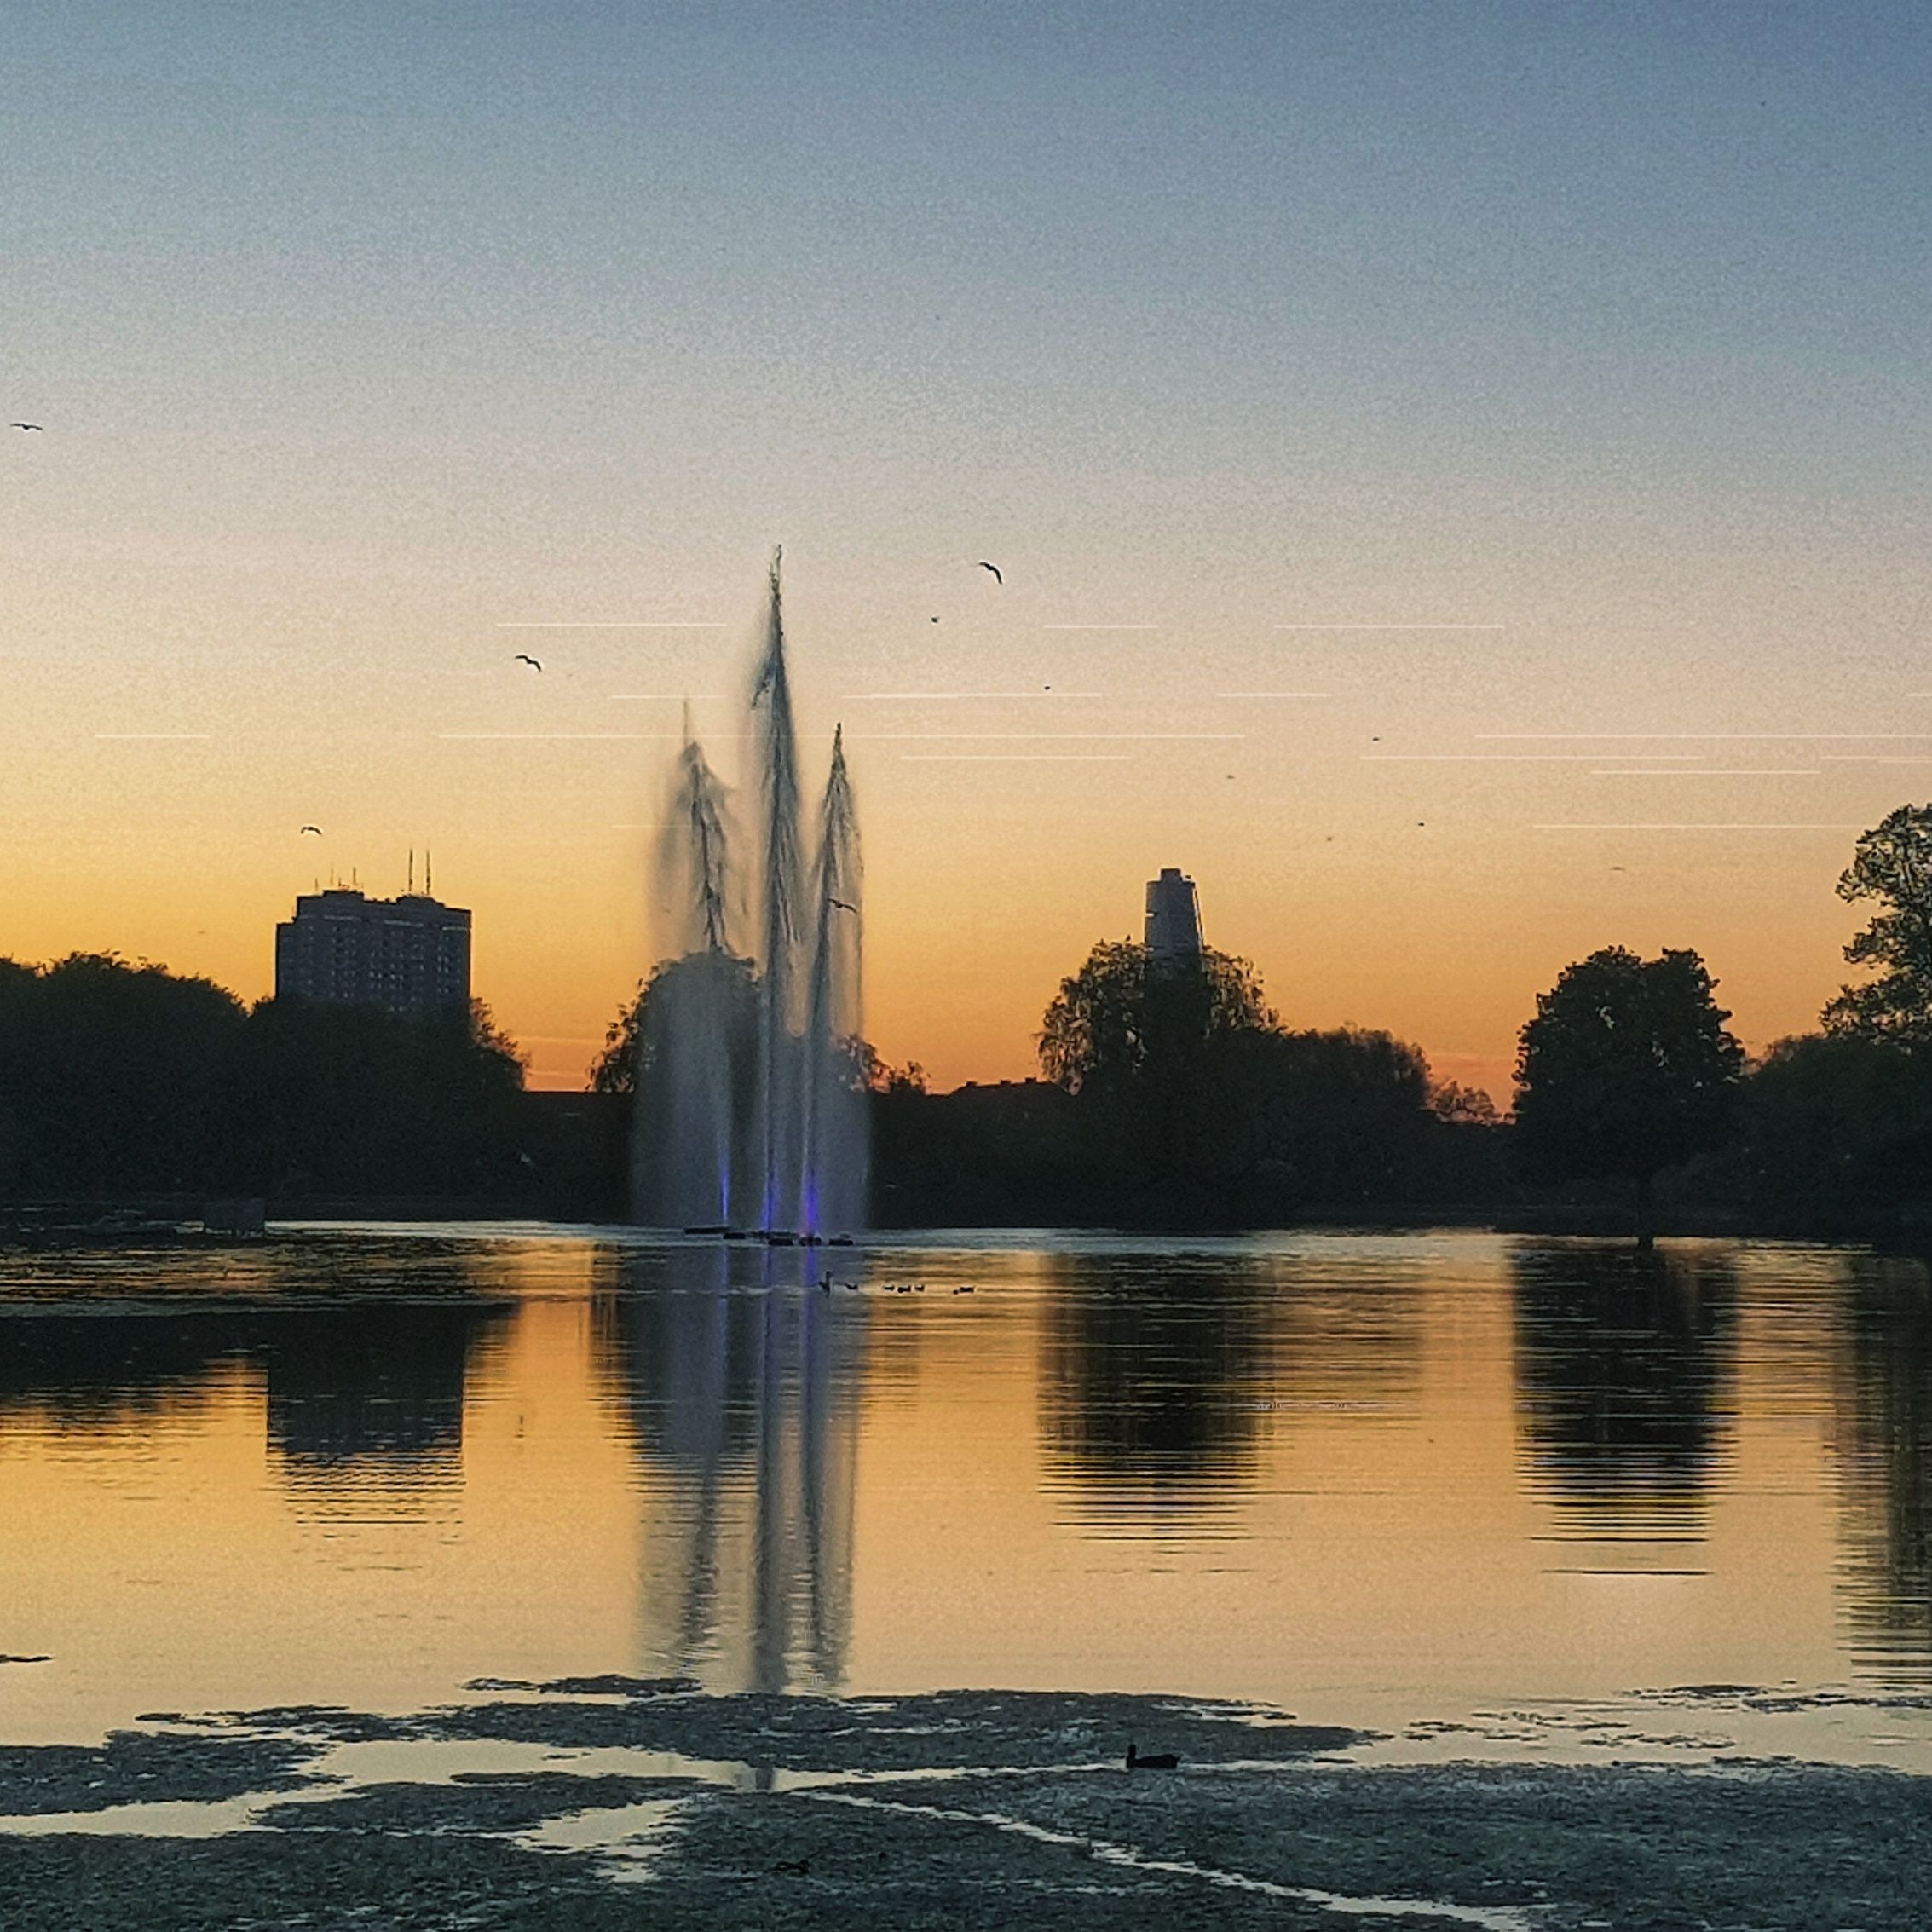 Day 134 - May 14: Sunset in the Park